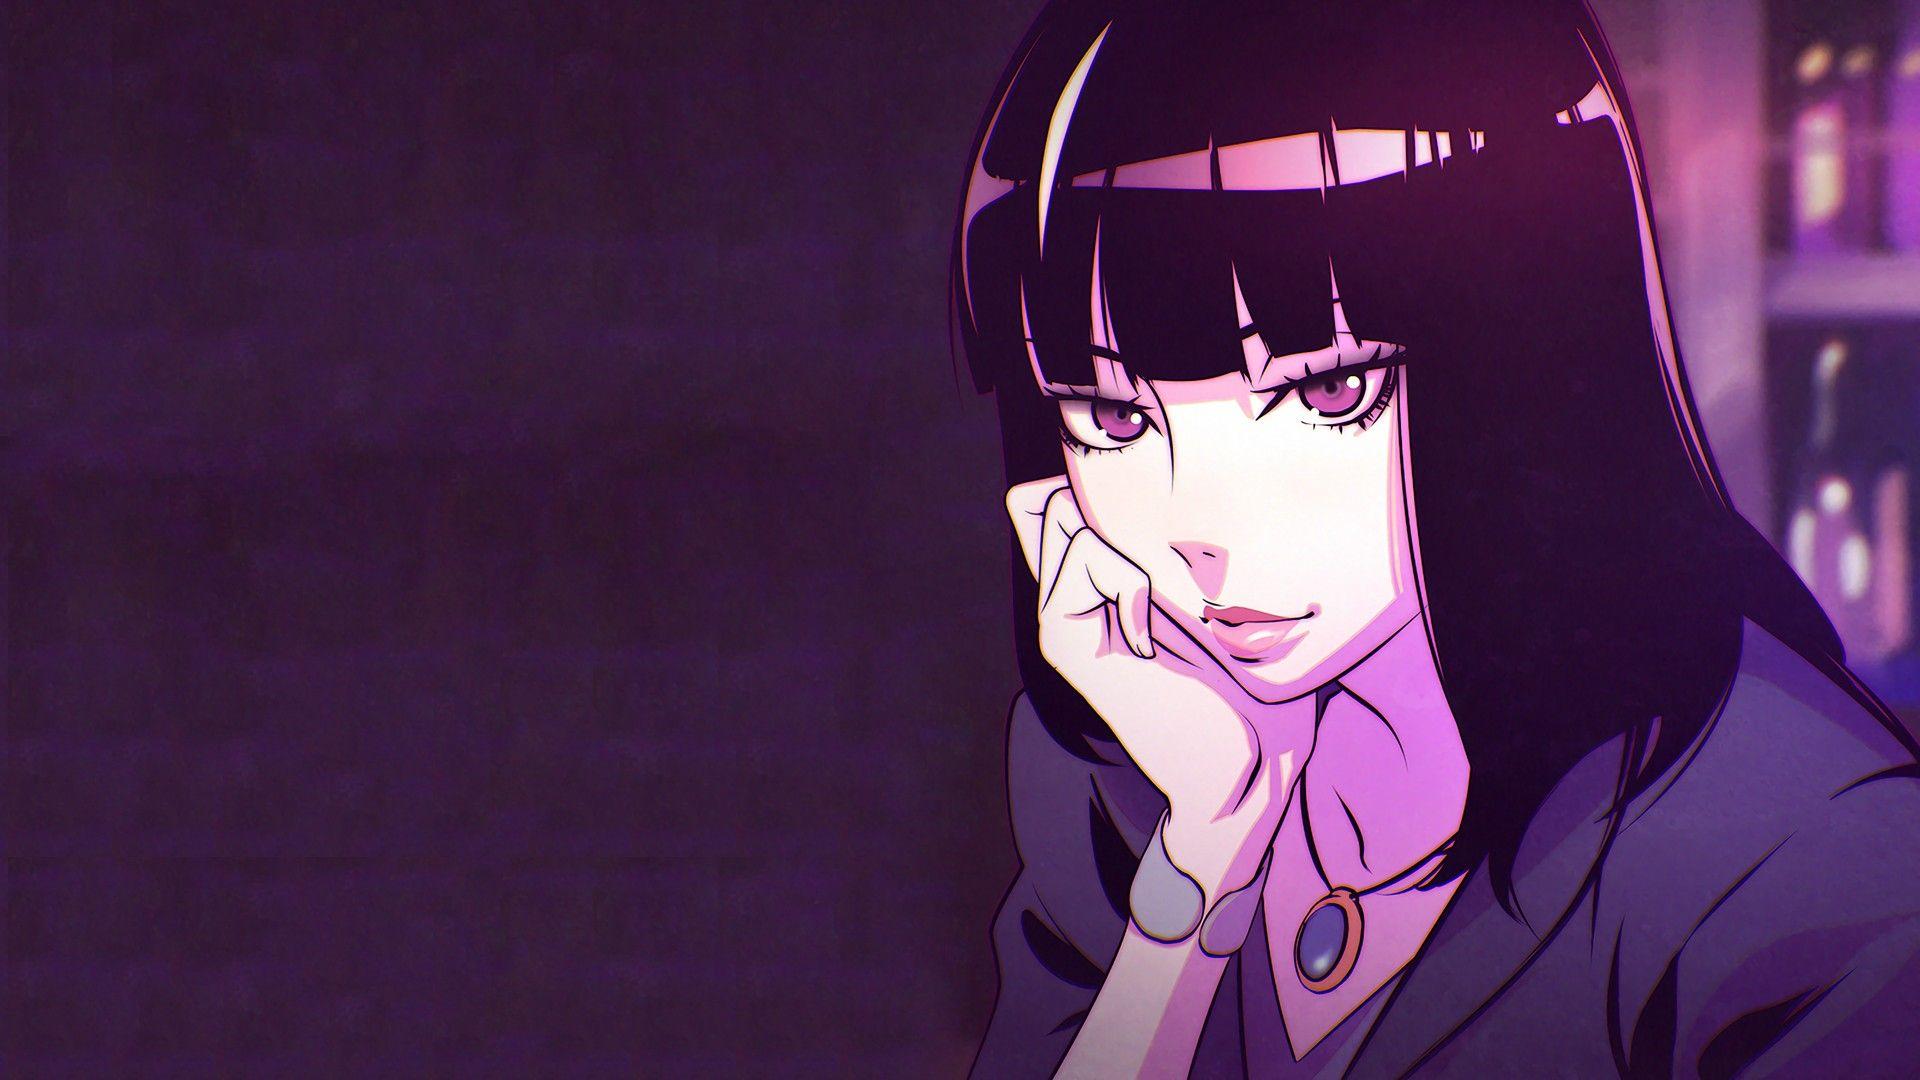 Death Parade Wallpapers - Top Free Death Parade Backgrounds